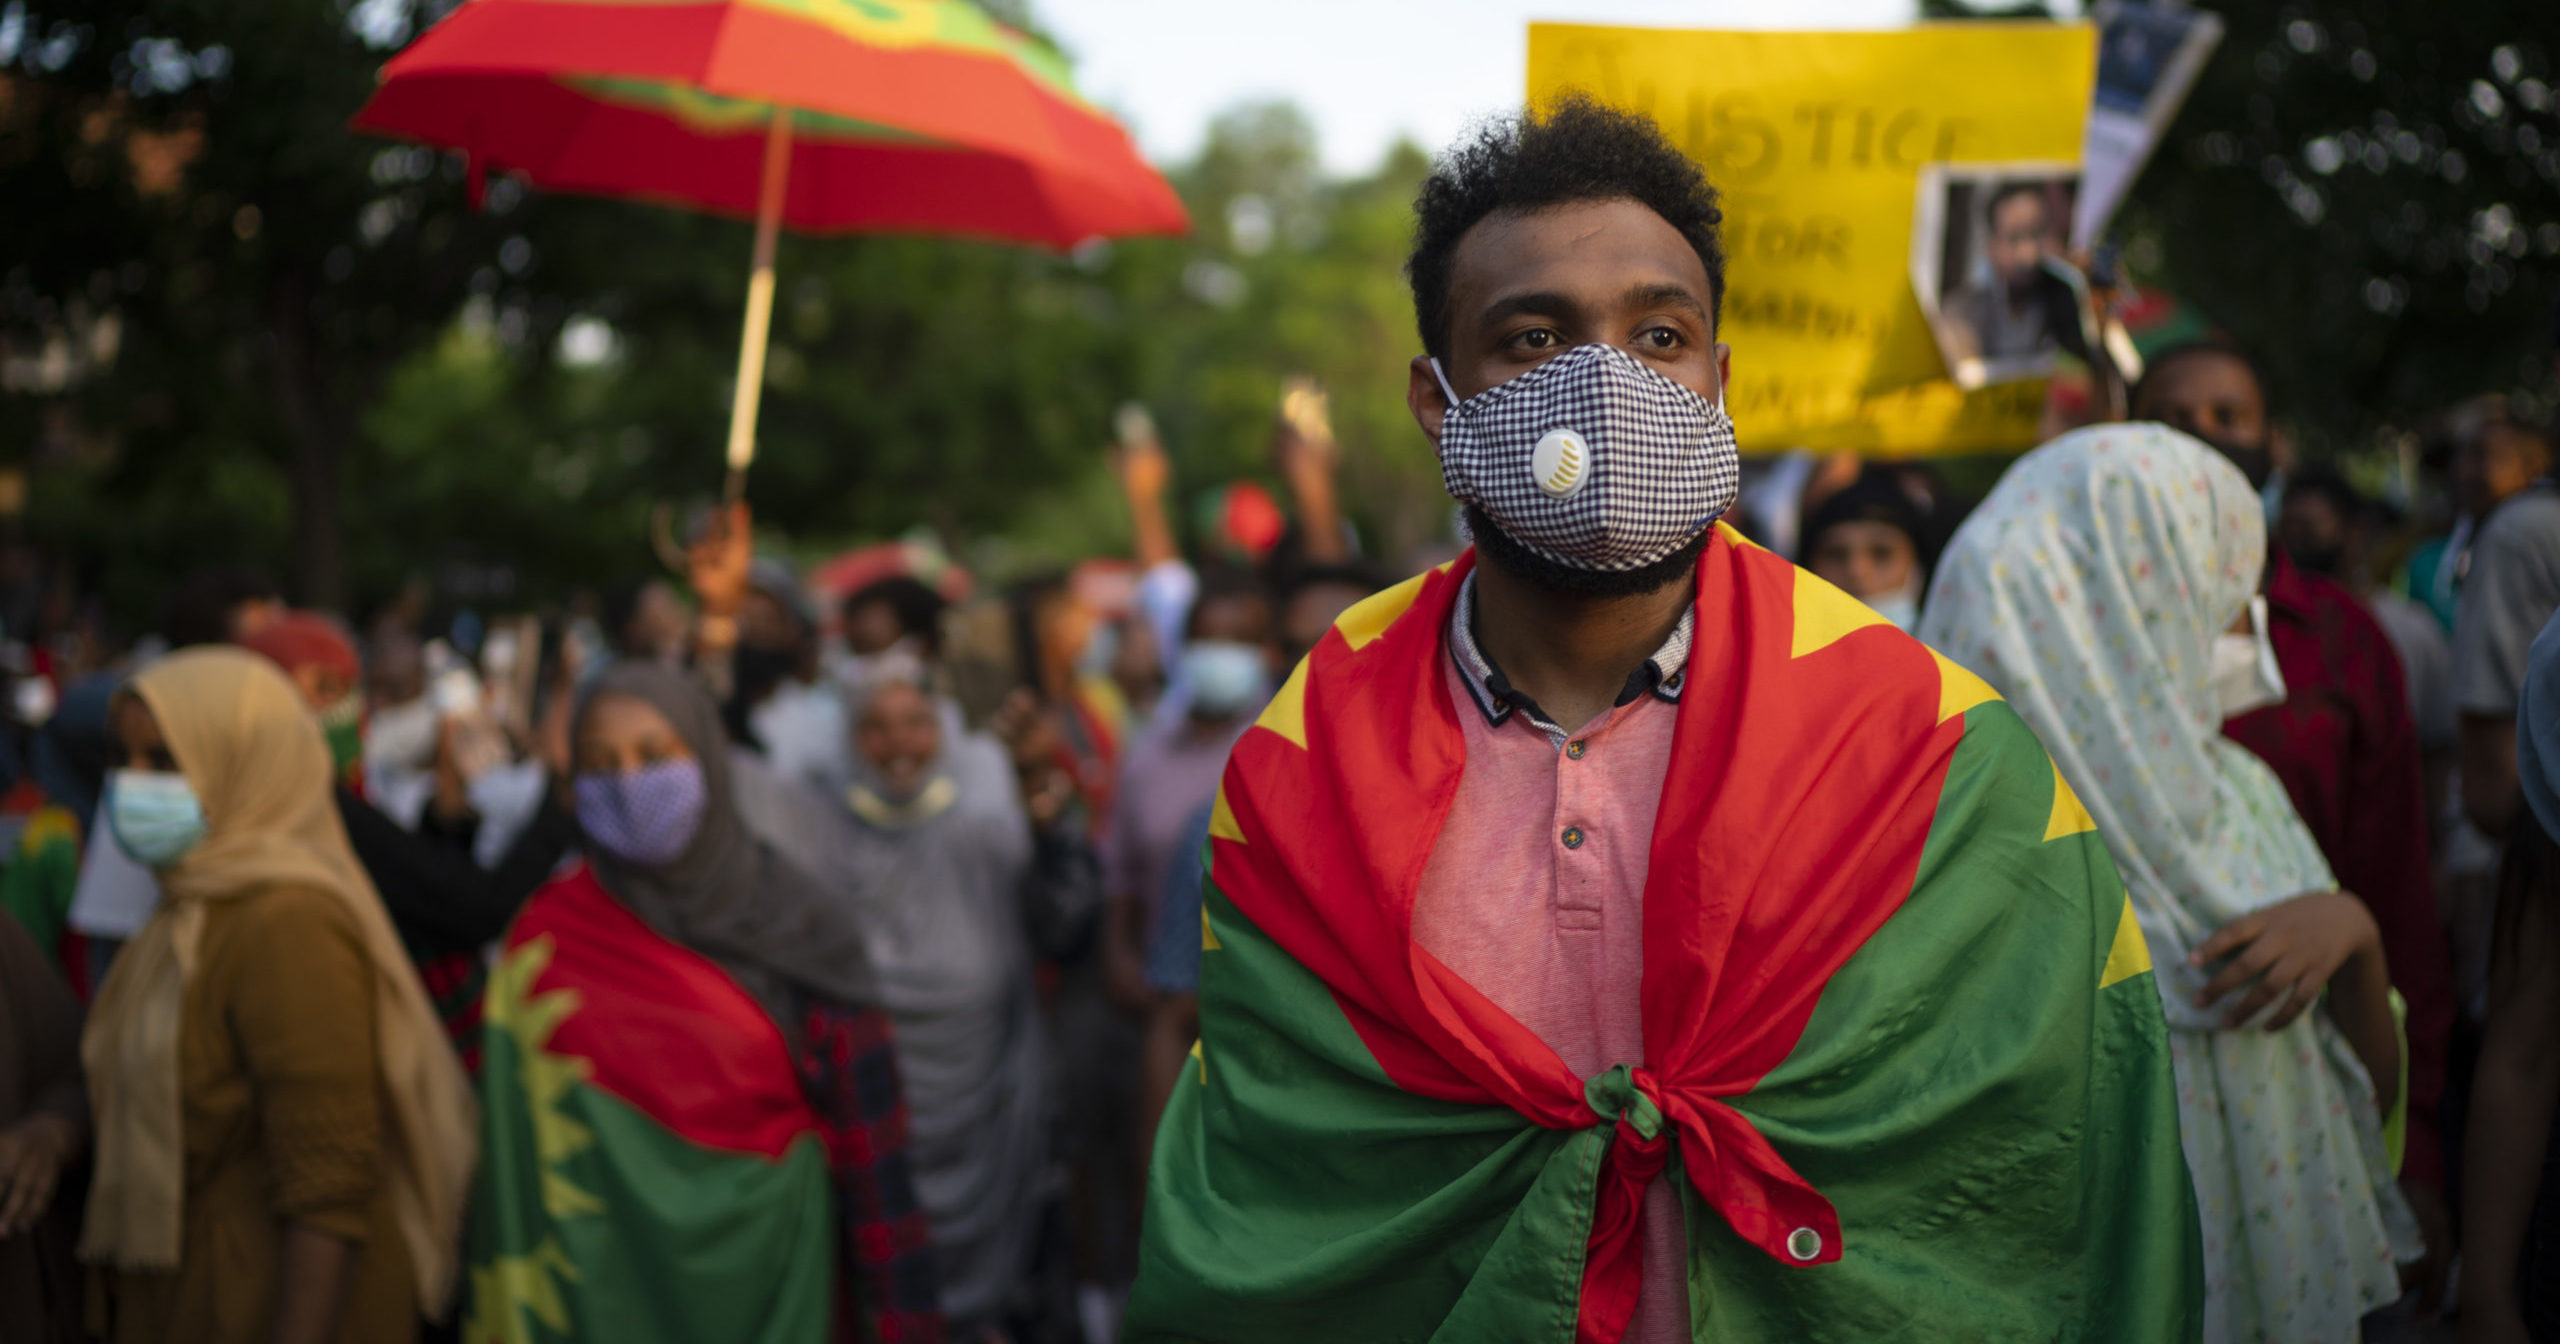 In this July 1, 2020, file photo, protesters outraged by the killing of popular Ethiopian singer Hachalu Hundessa march in St. Paul, Minnesota. Ethiopian officials said on July 8 that at least 239 people have been killed and 3,500 arrested in a week of unrest in Ethiopia.